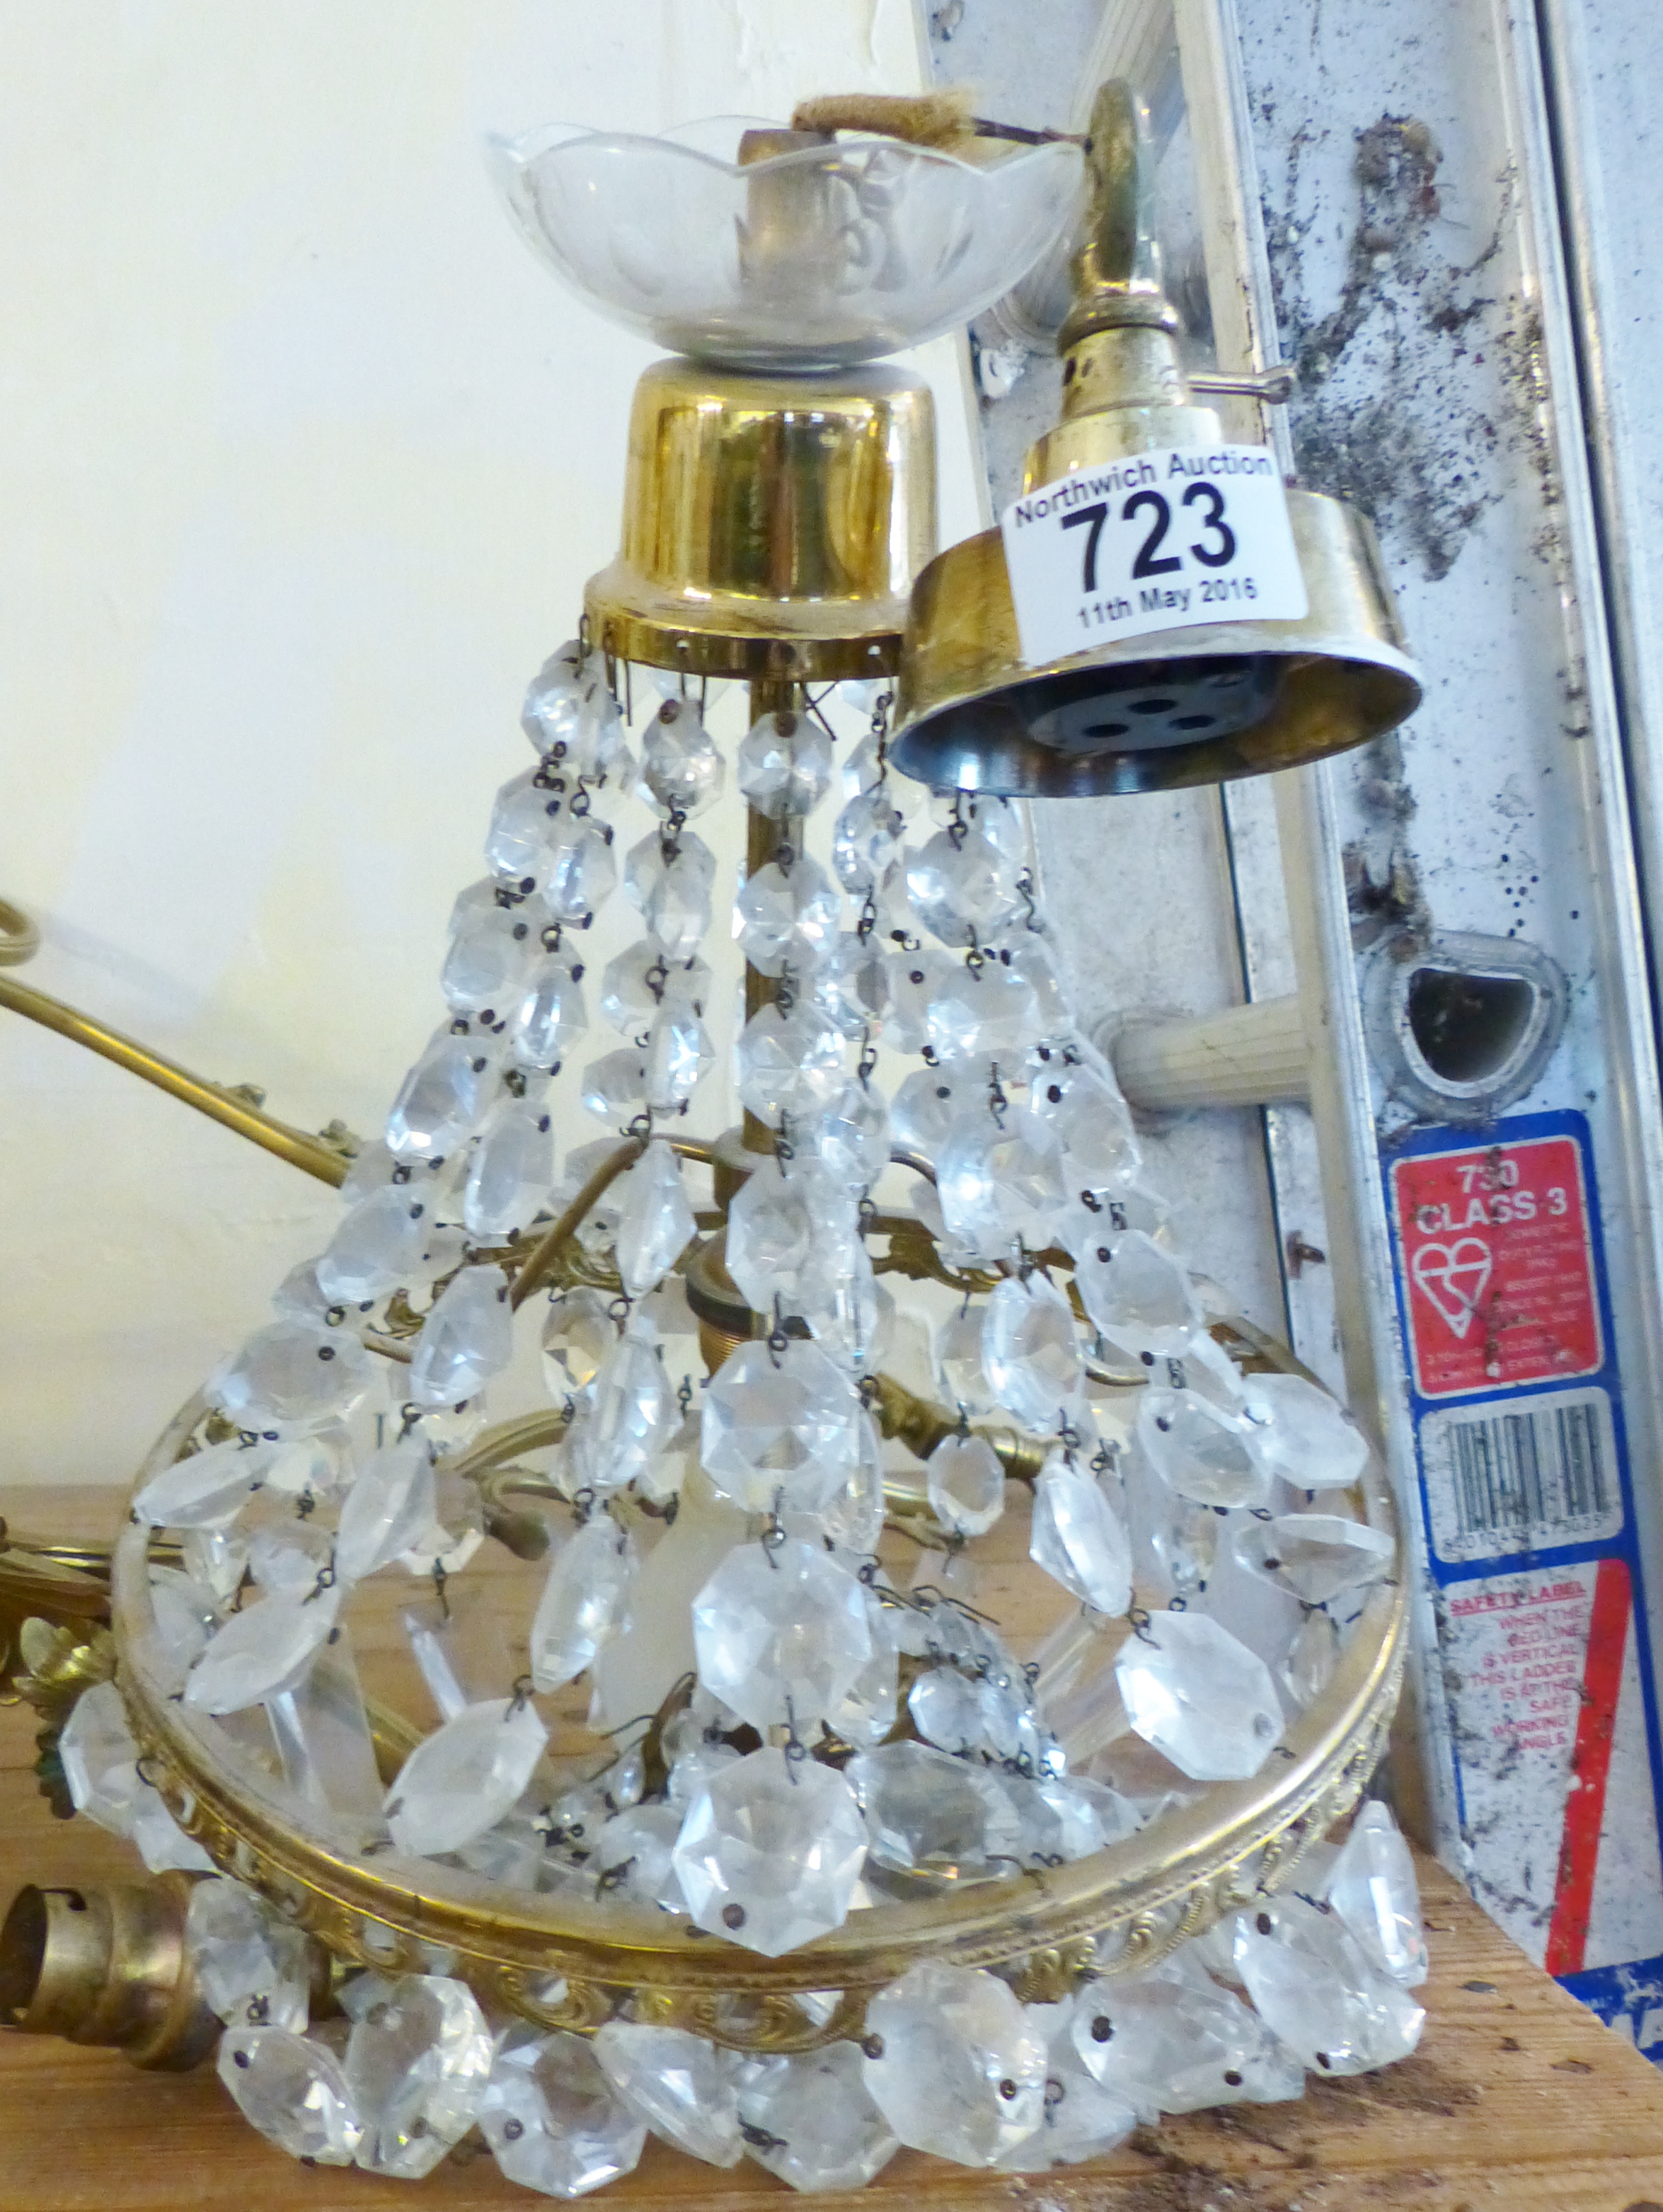 BRASS LIGHT FITTING. Vintage brass ceiling light fitting with crystal droplets